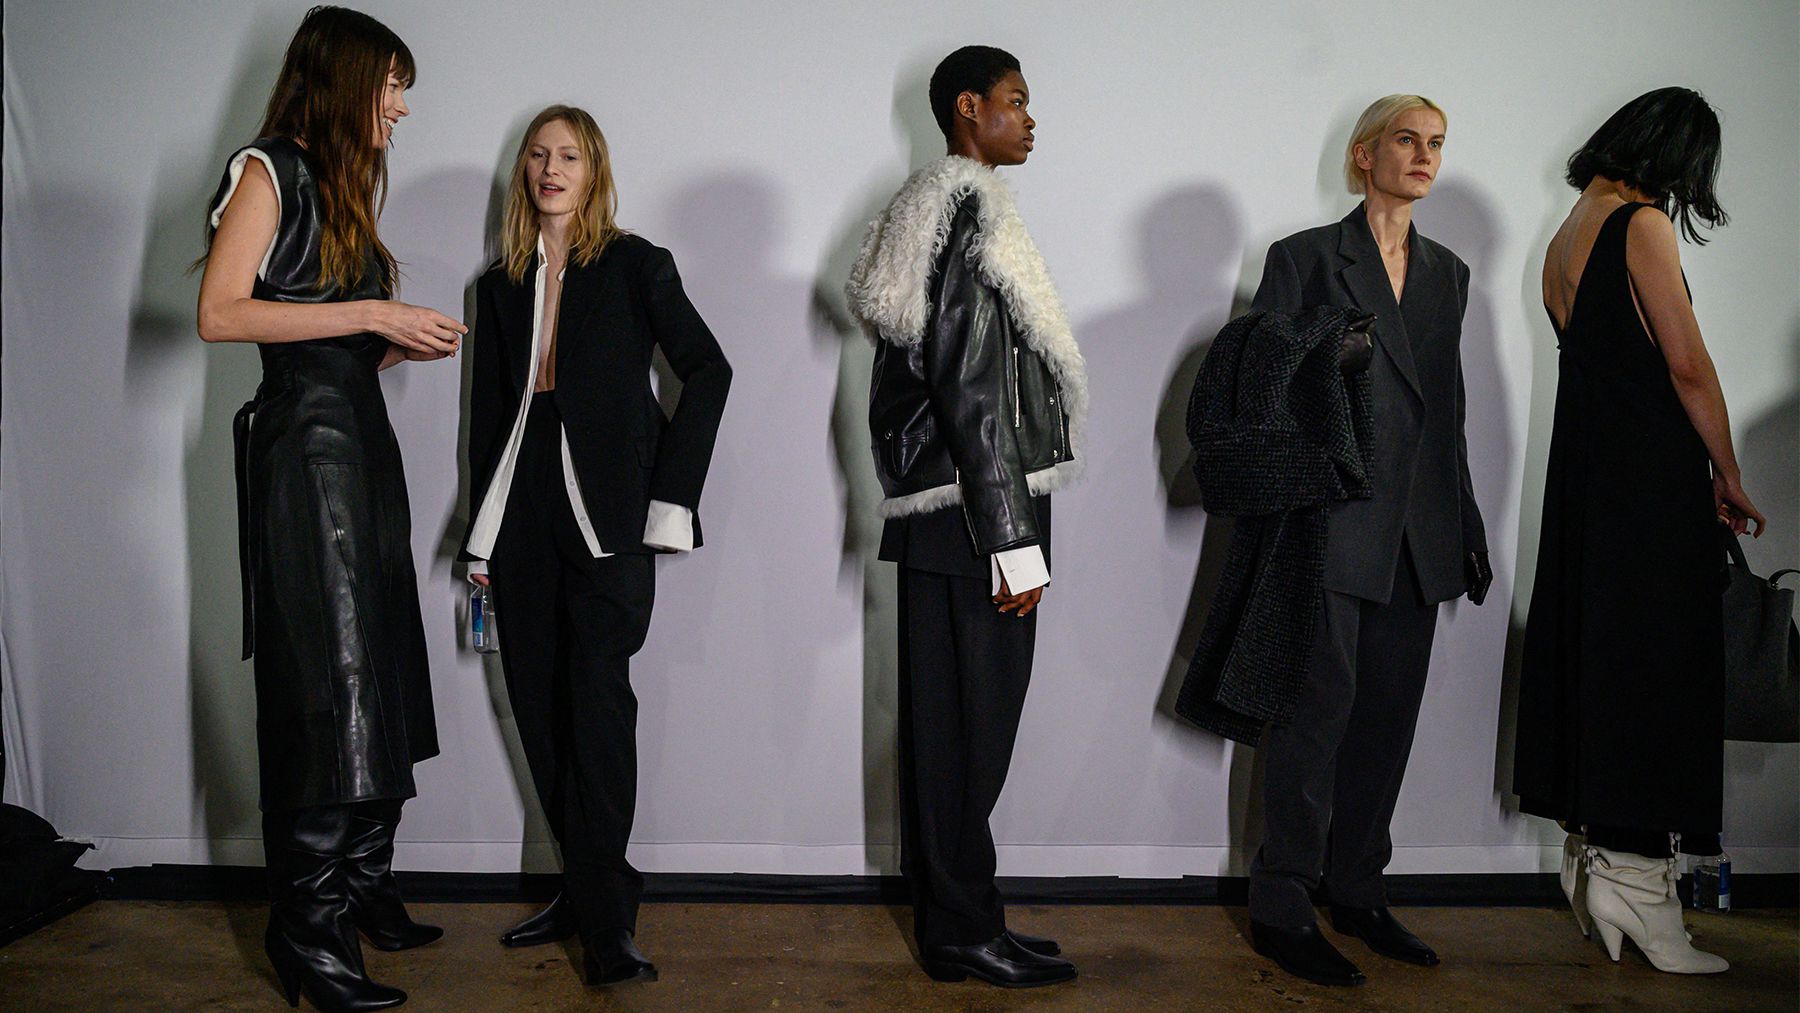 New York Fashion Week Faces Its Fears